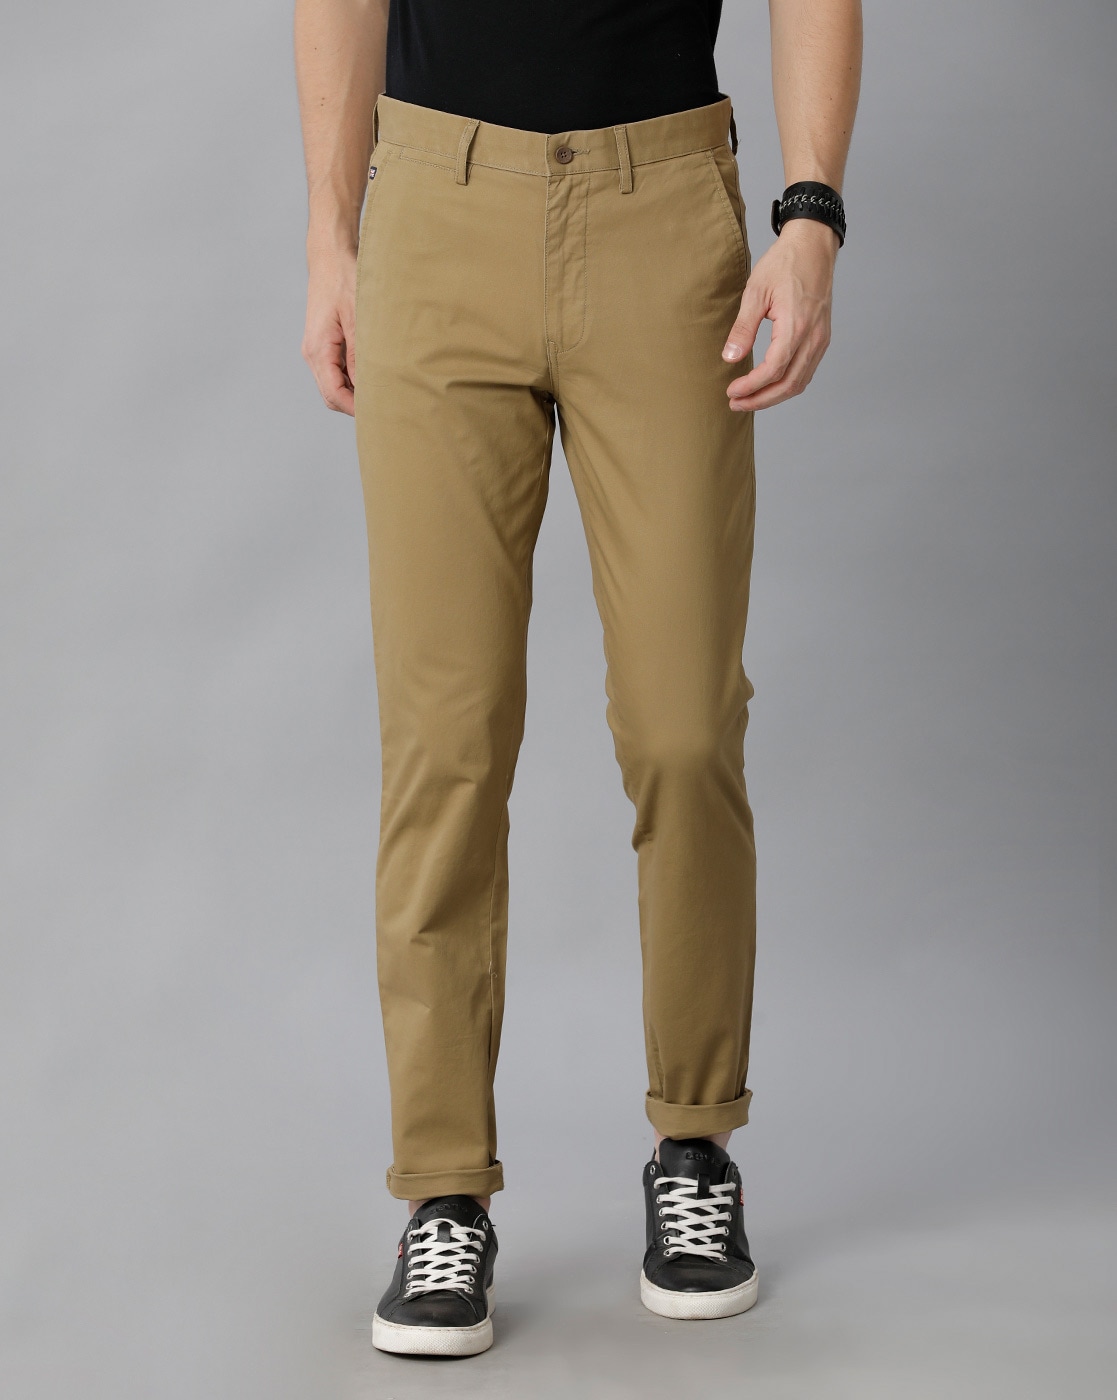 Buy Polo Ralph Lauren Men Tan Stretch Slim Fit Chino Pant Online - 798429 |  The Collective